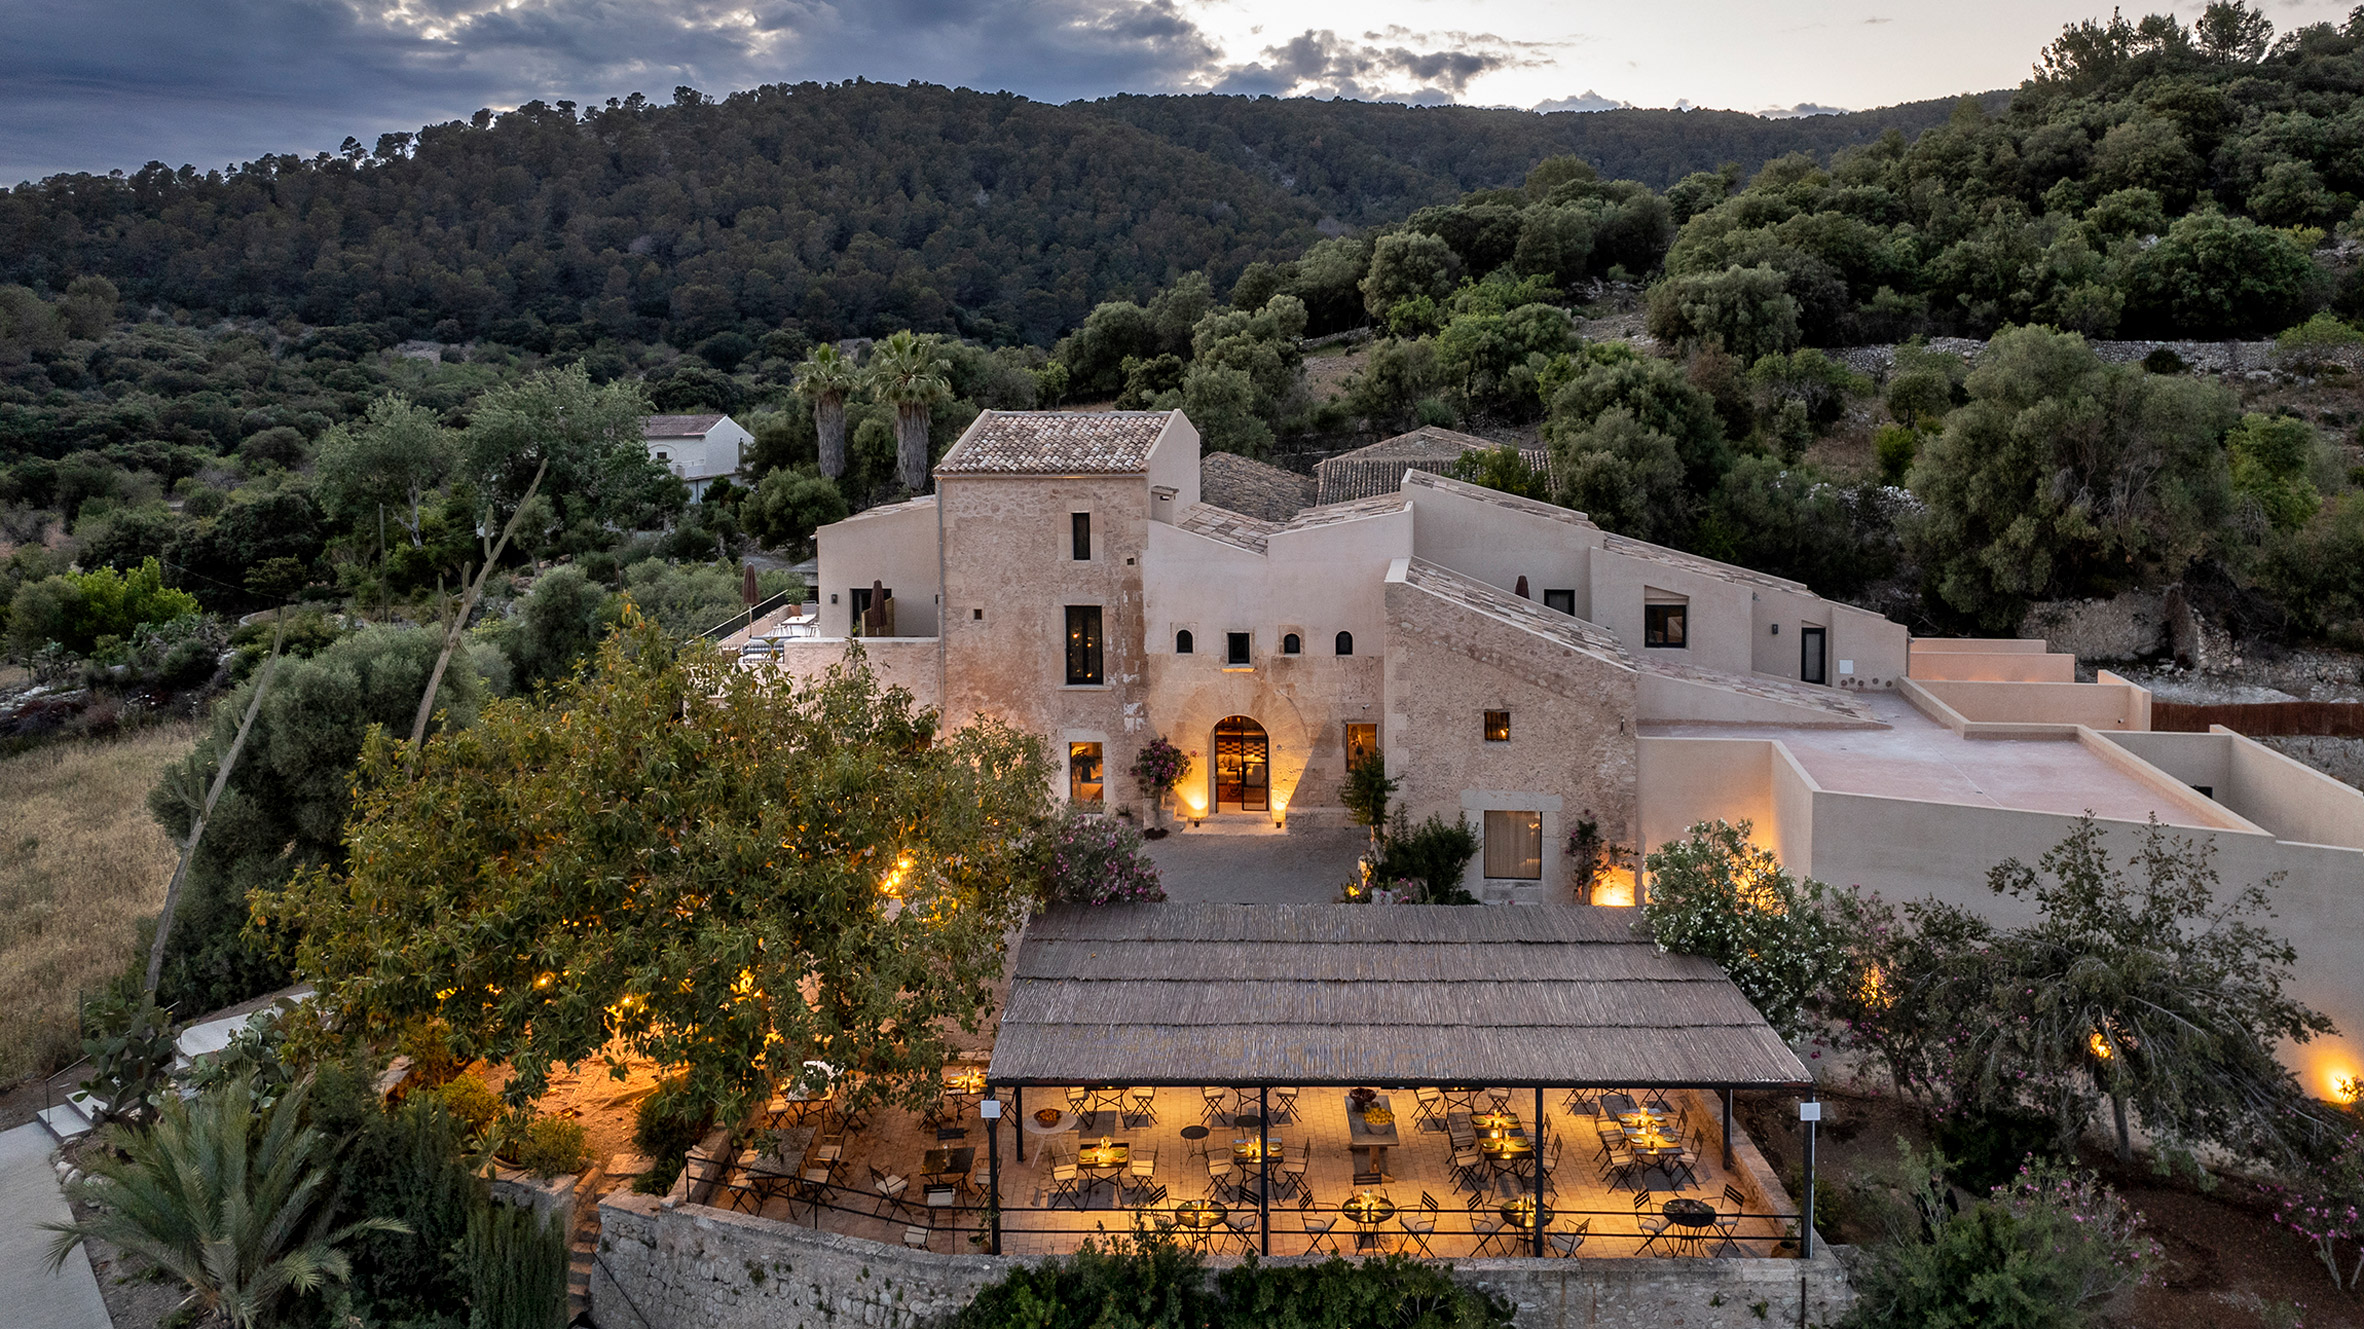 The Lodge hotel takes over 500-year-old farmhouse in Mallorca